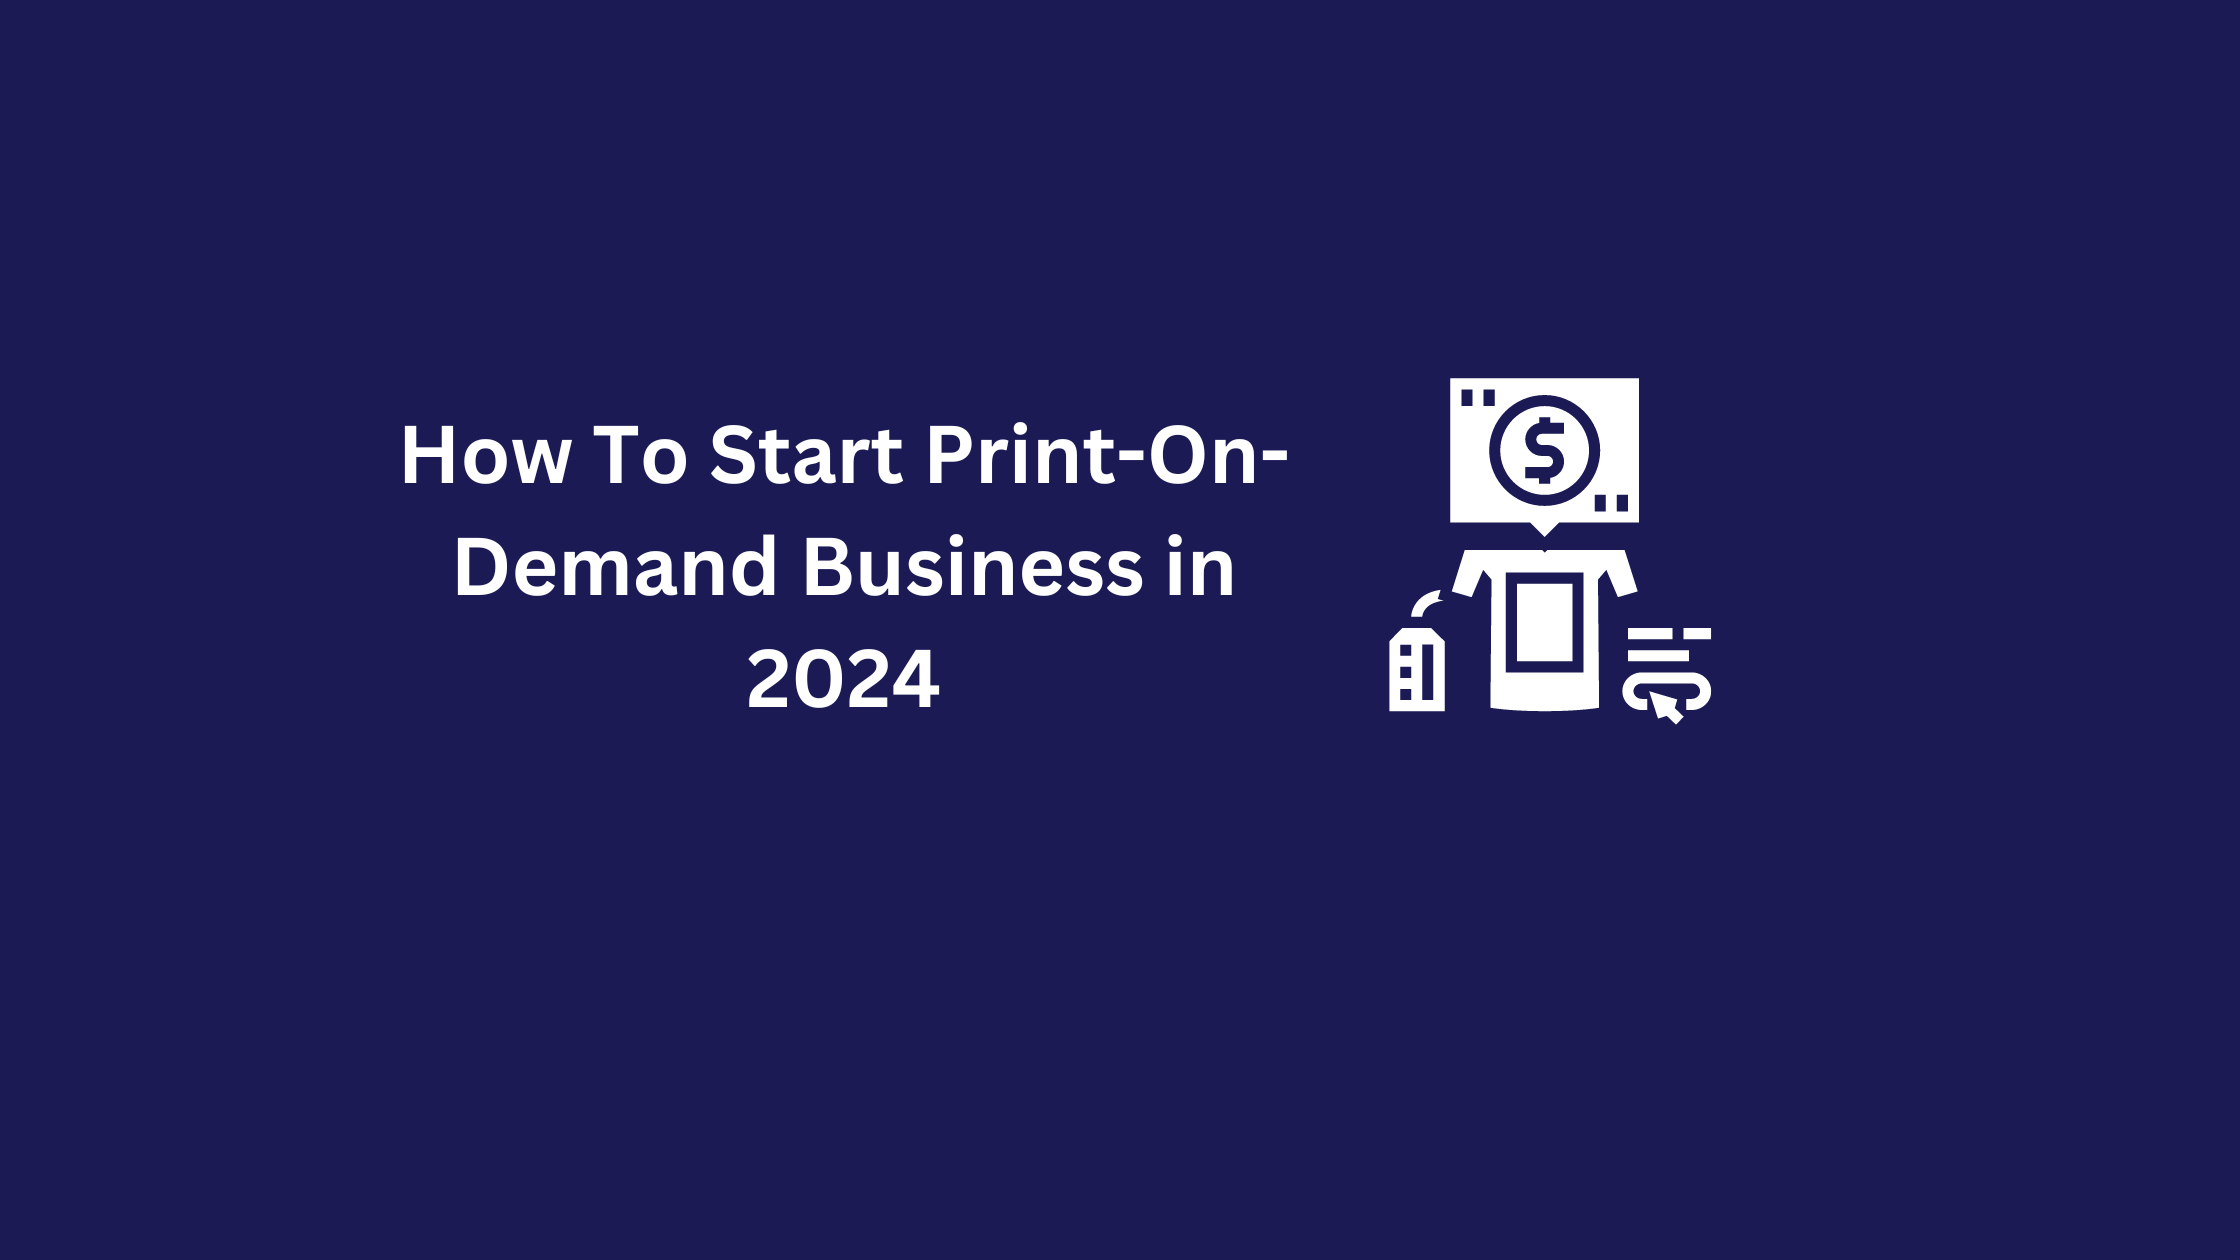 How To Start Print On Demand Business in 2024